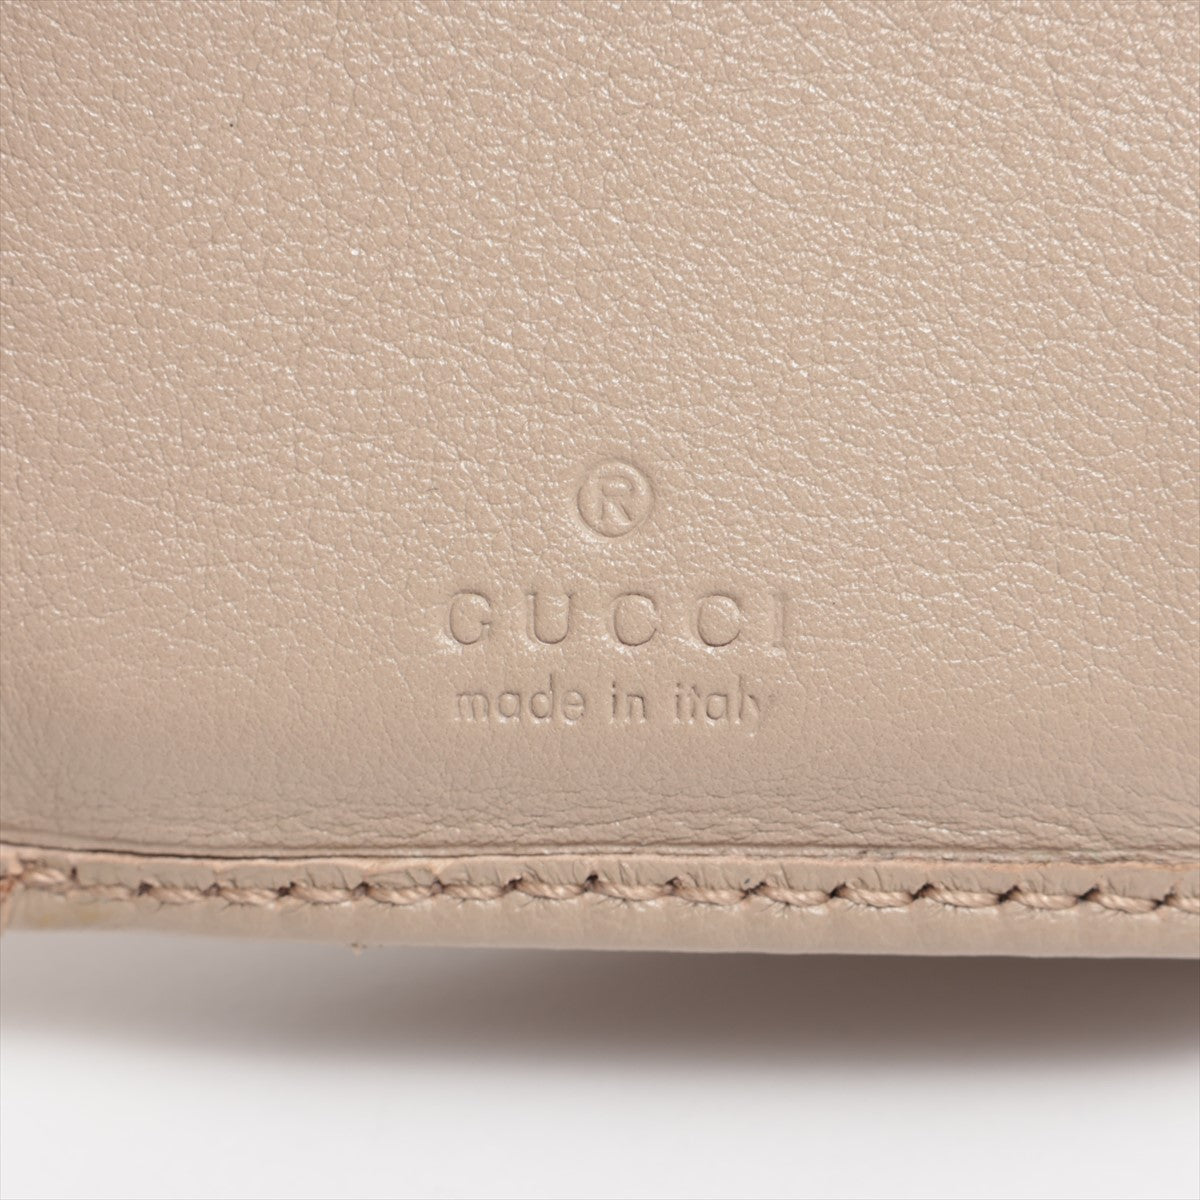 Gucci Bamboo 658633 Leather Compact Wallet Beagle